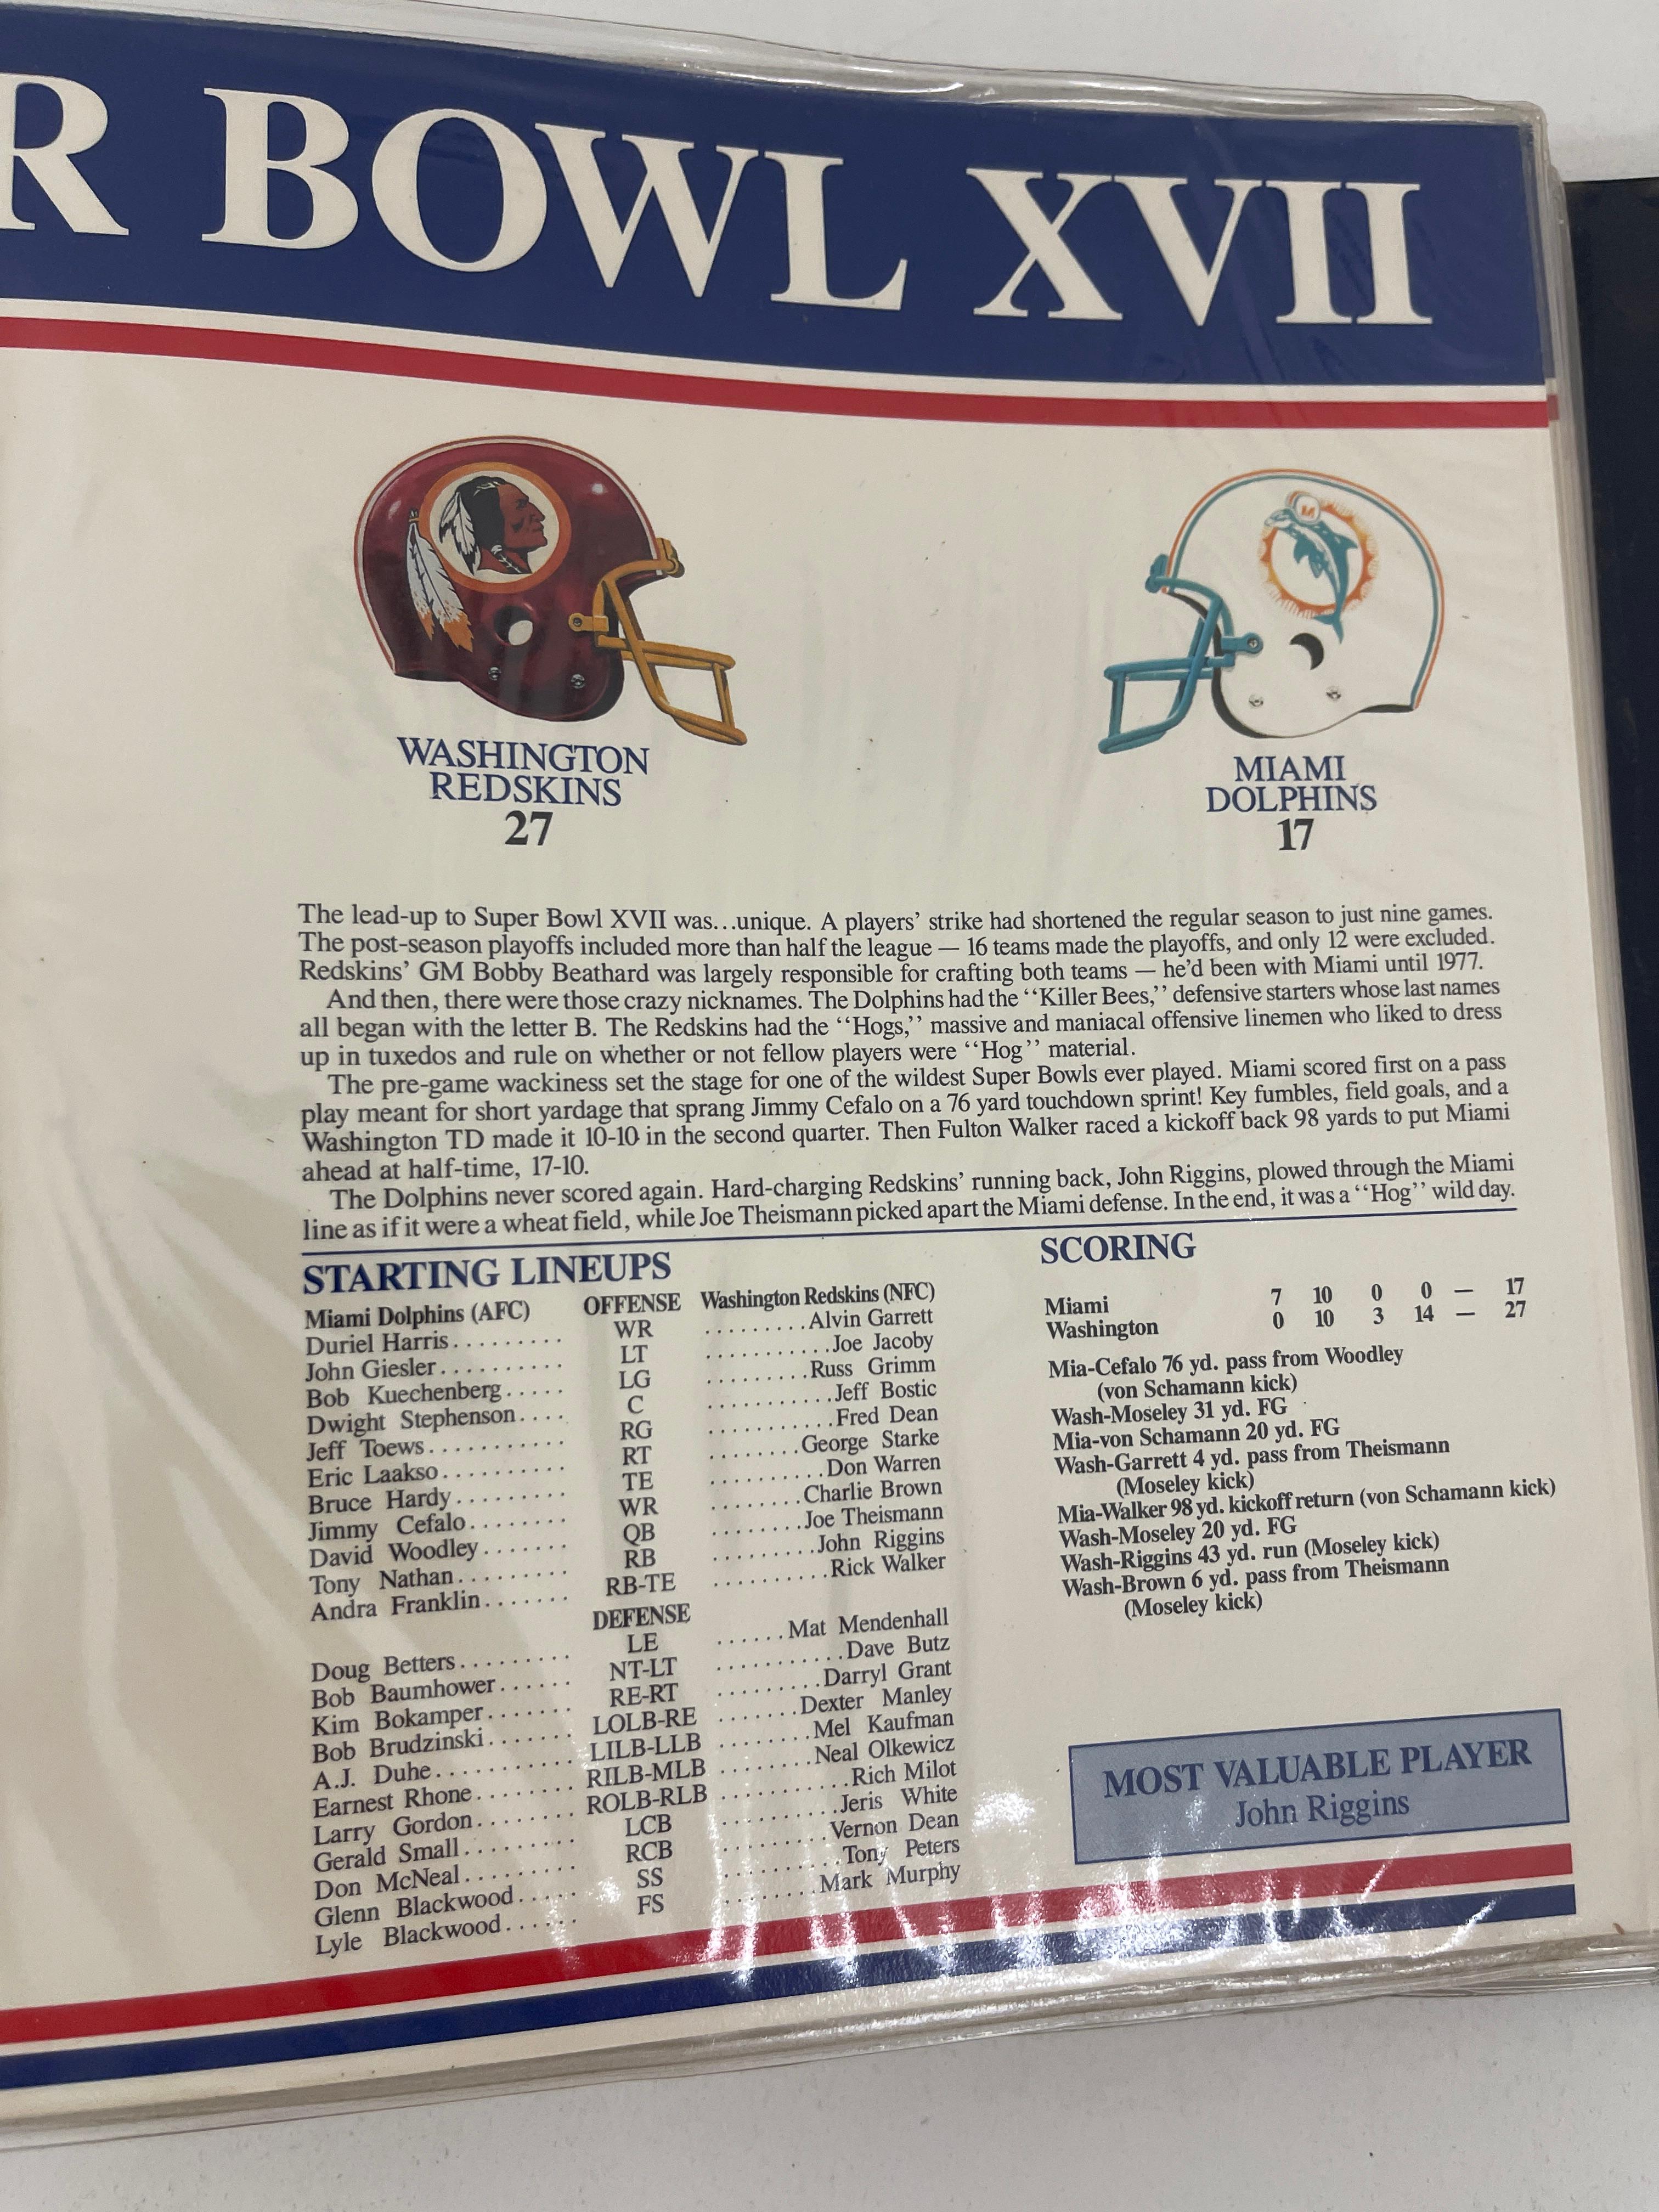 The Official NFL Super Bowl Patch Collection Binder